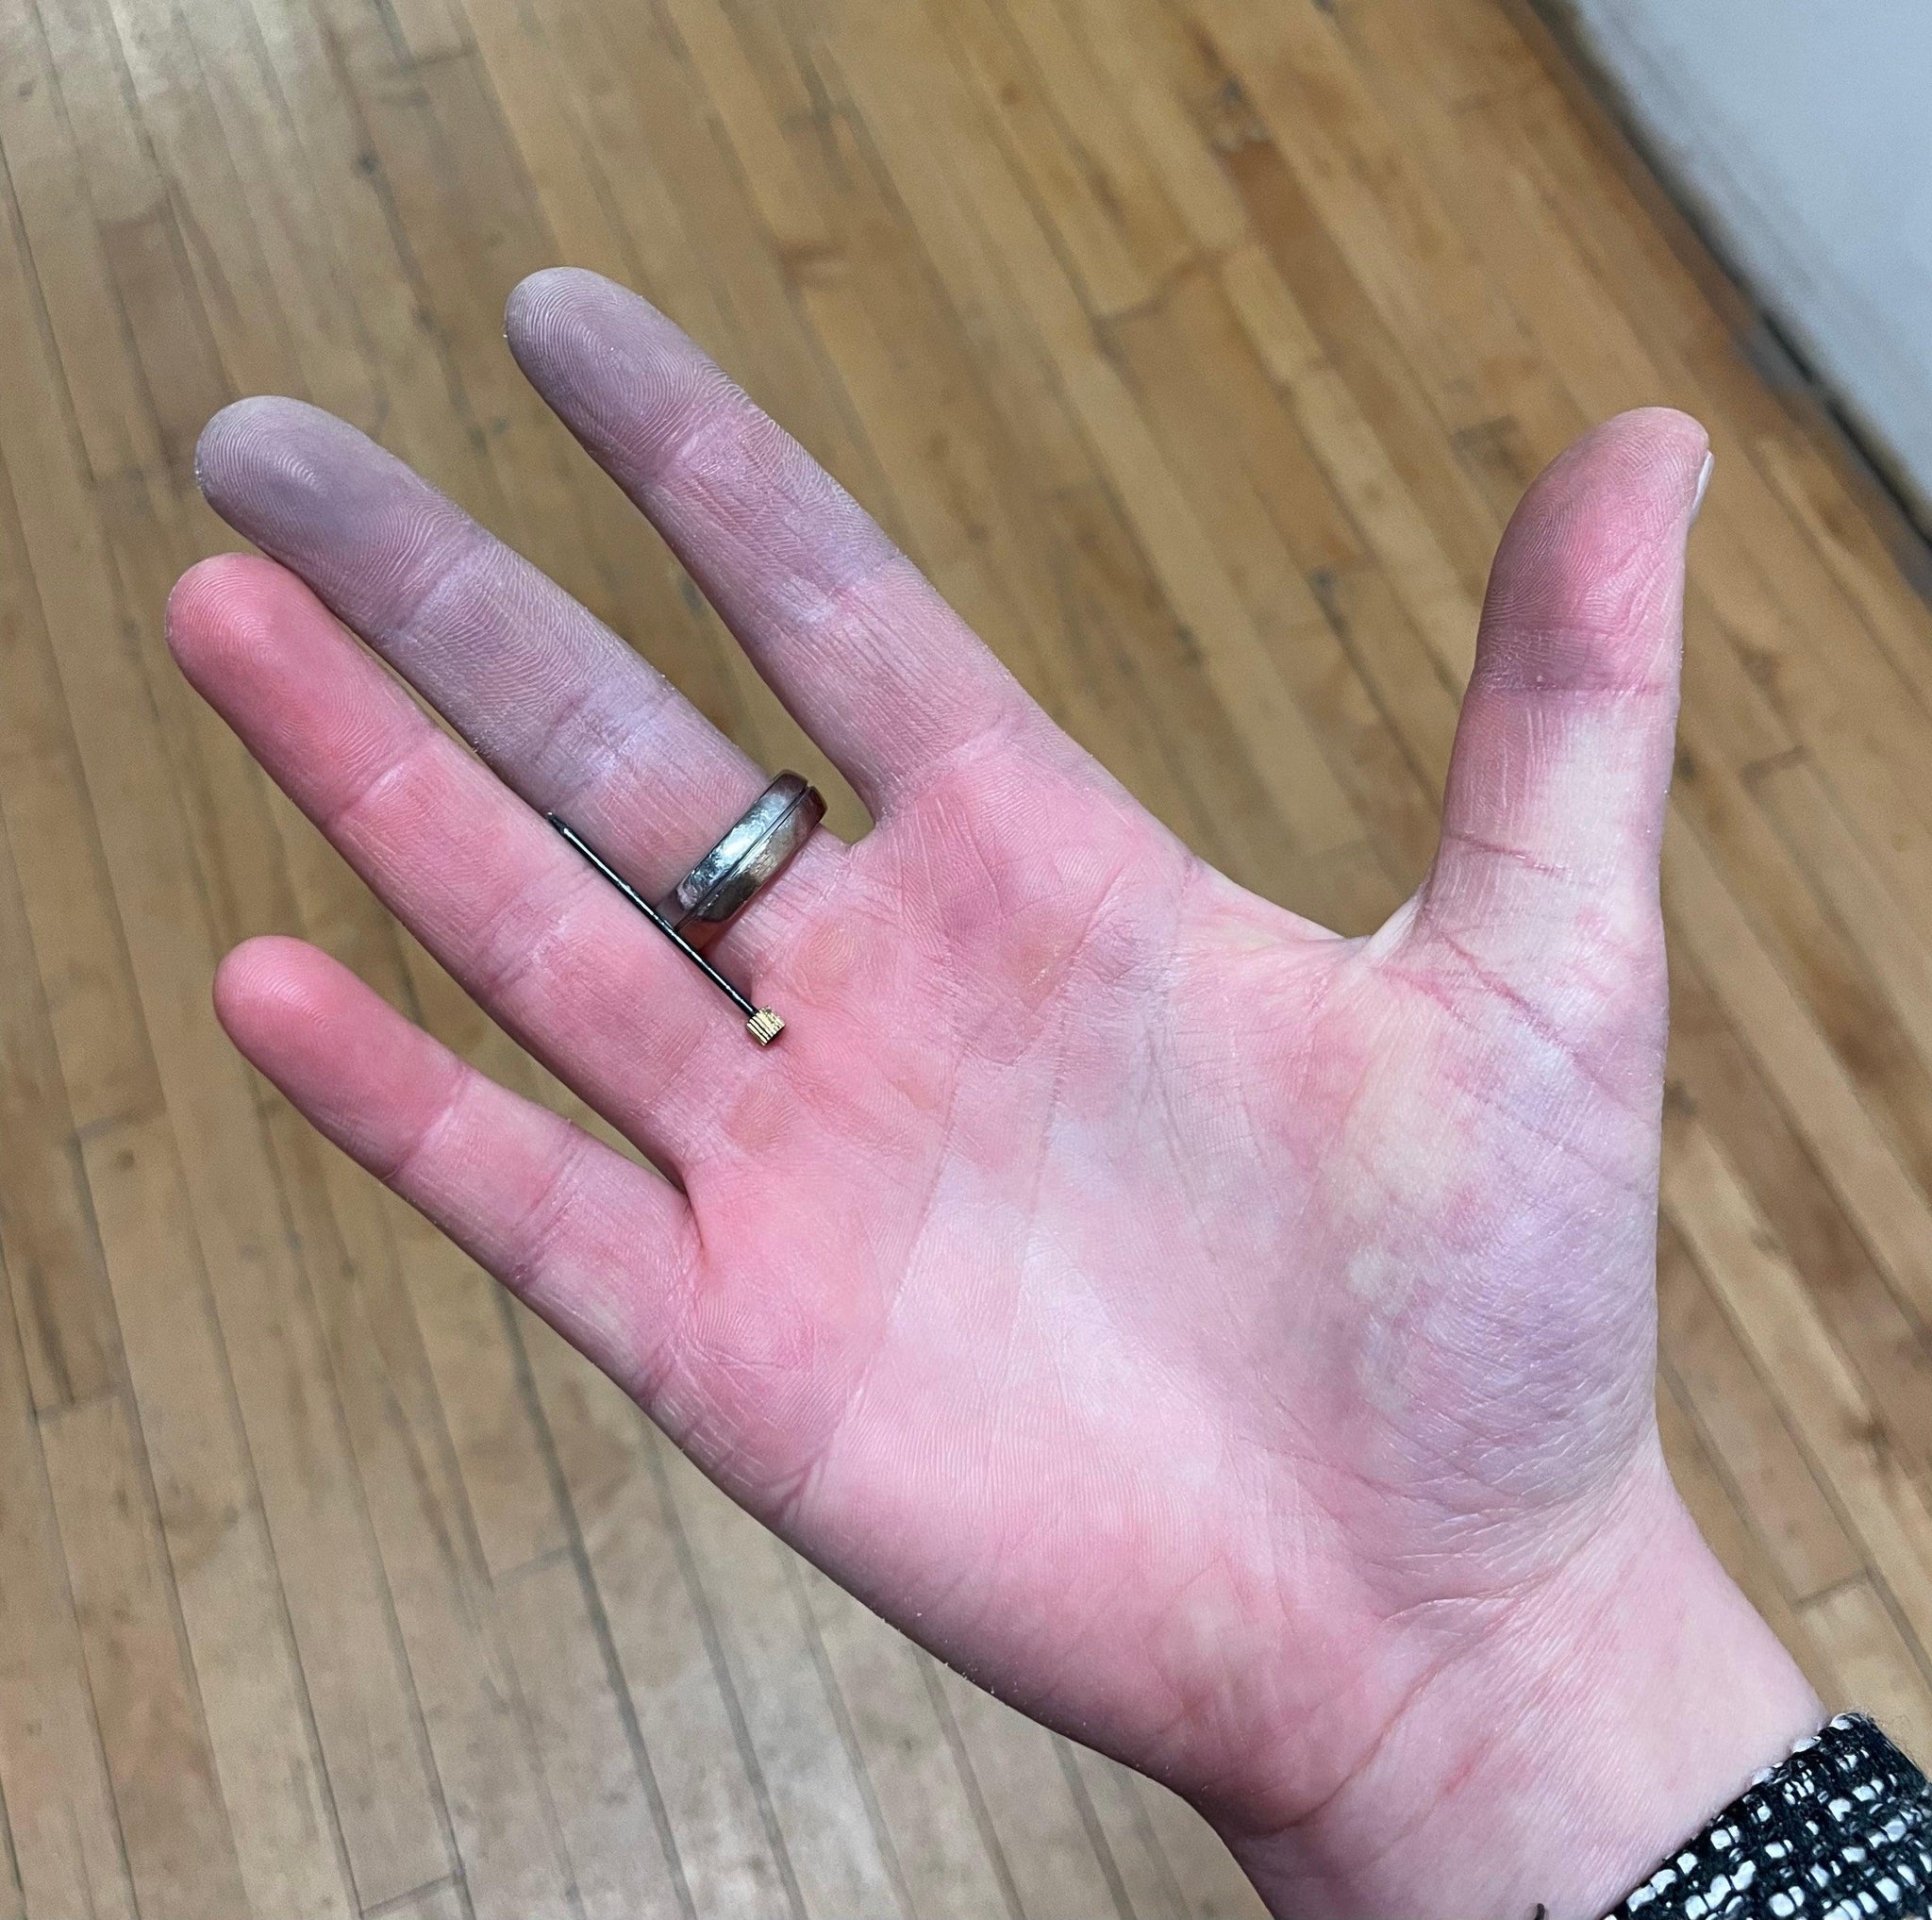 The Raynaud's Association Endorses The Writer's Glove